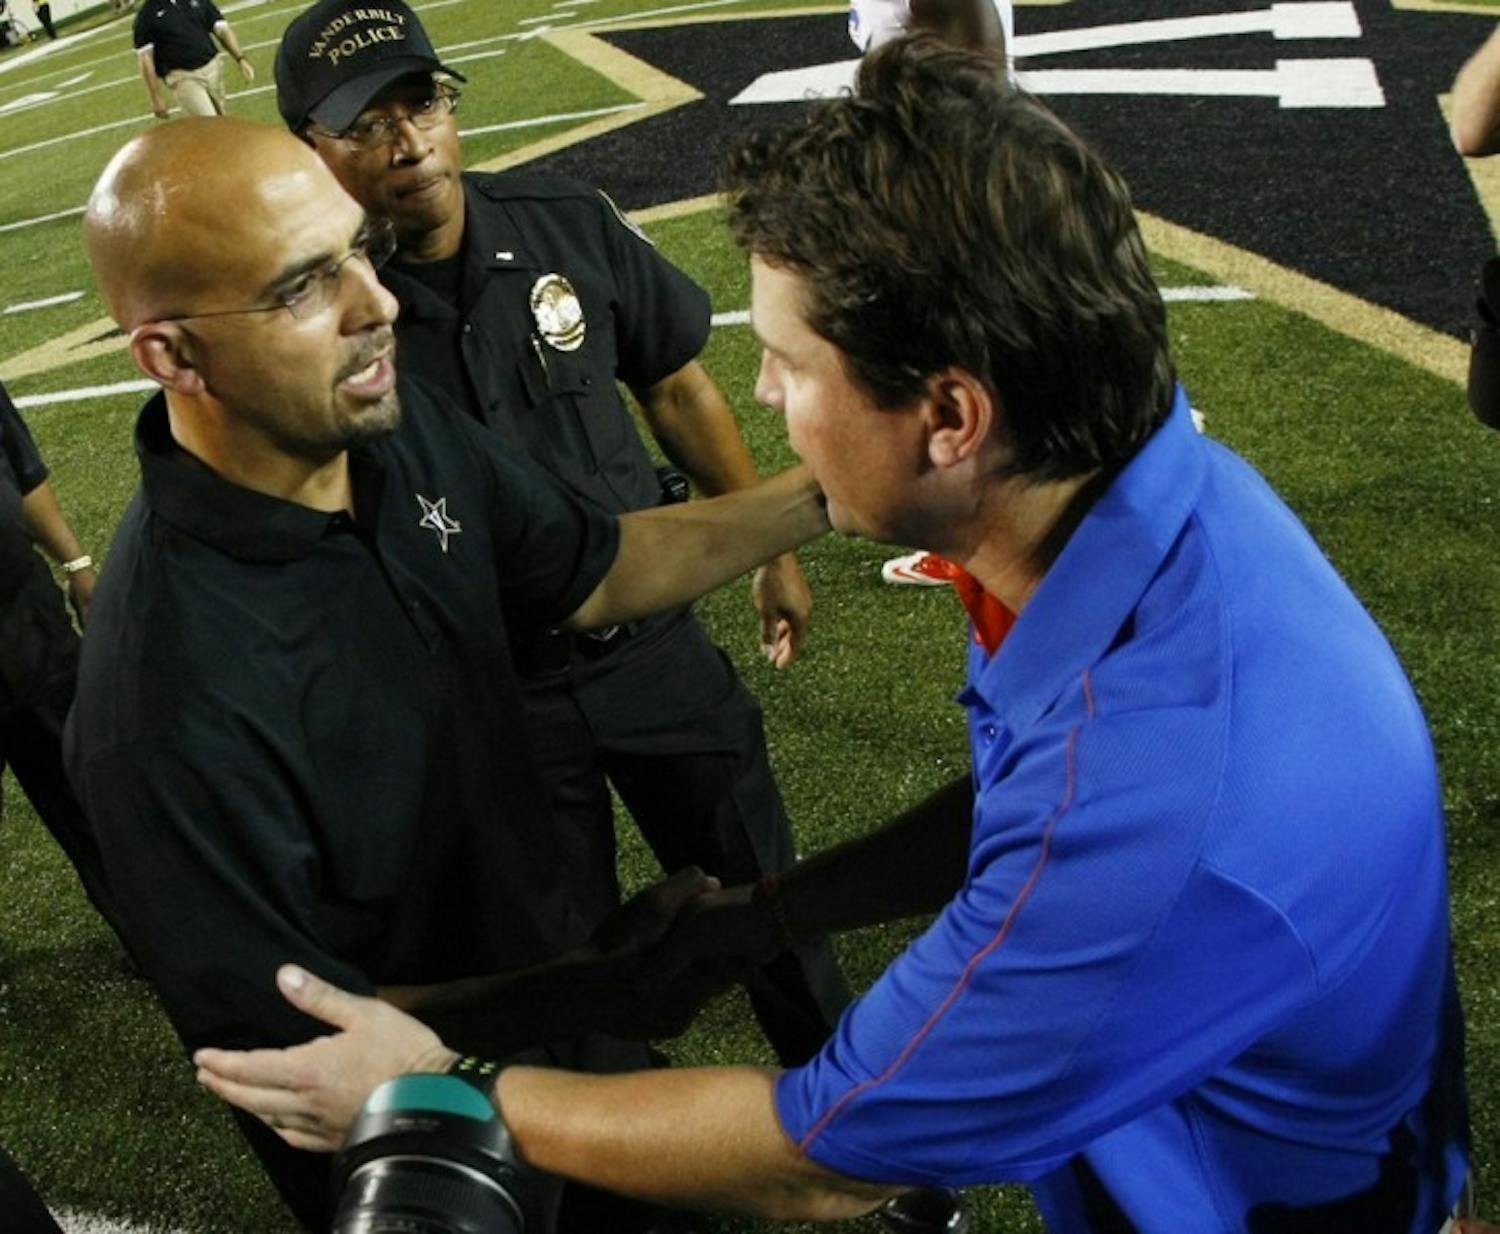 Coach Will Muschamp (right) shakes hands with Vanderbilt coach James Franklin. If Franklin accepts the Penn State opening, Thomas Holley's choice in schools may sway in favor of Florida.